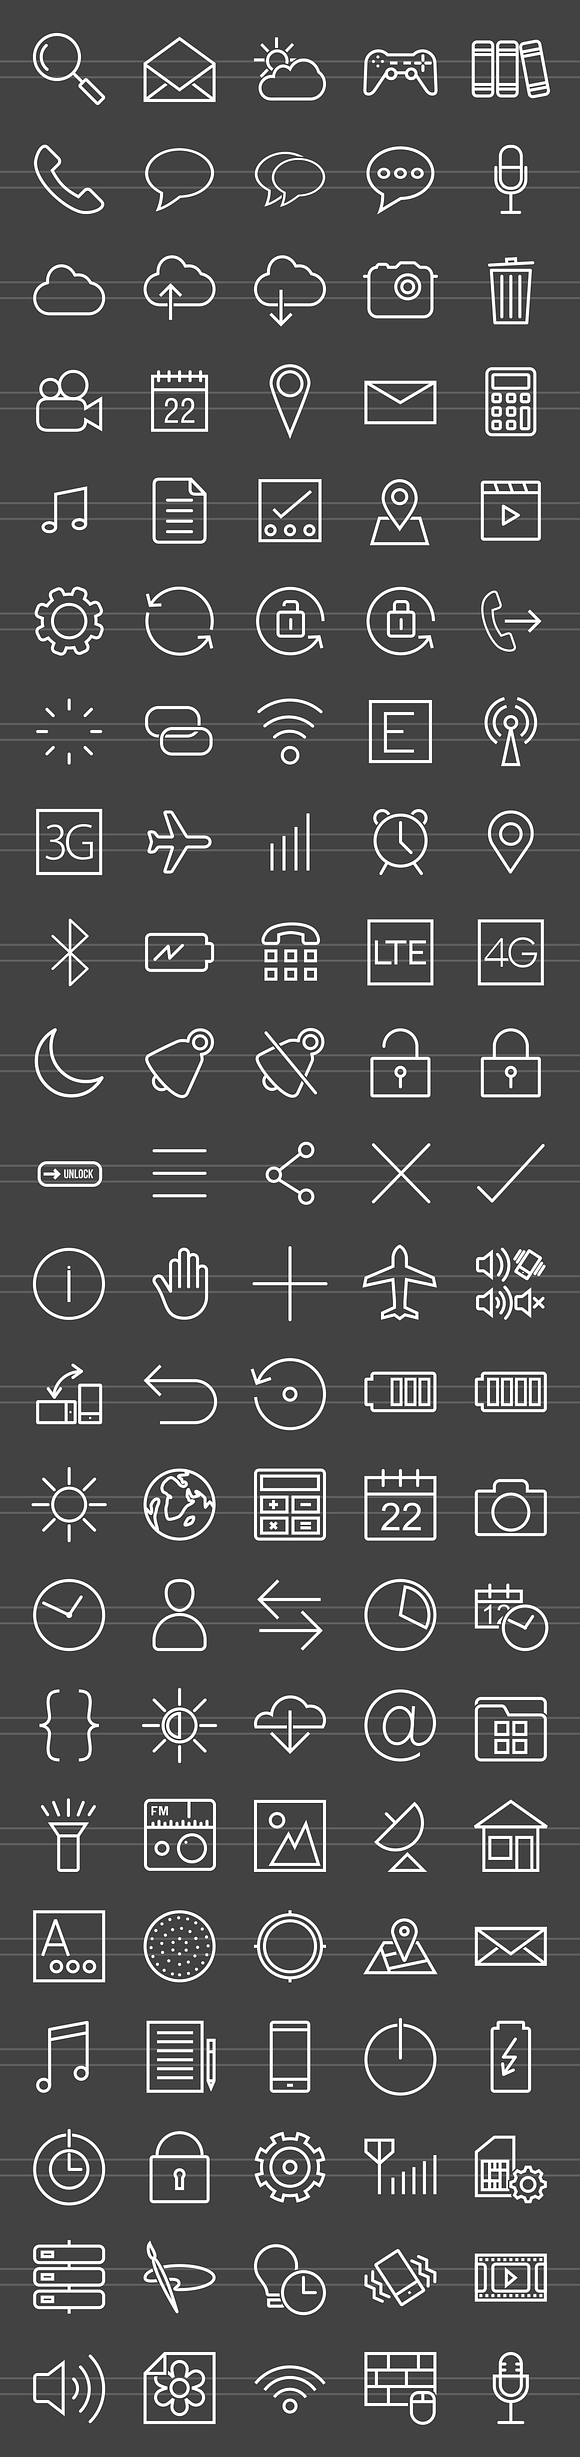 110 Mobile Interface Line Icons in Graphics - product preview 1